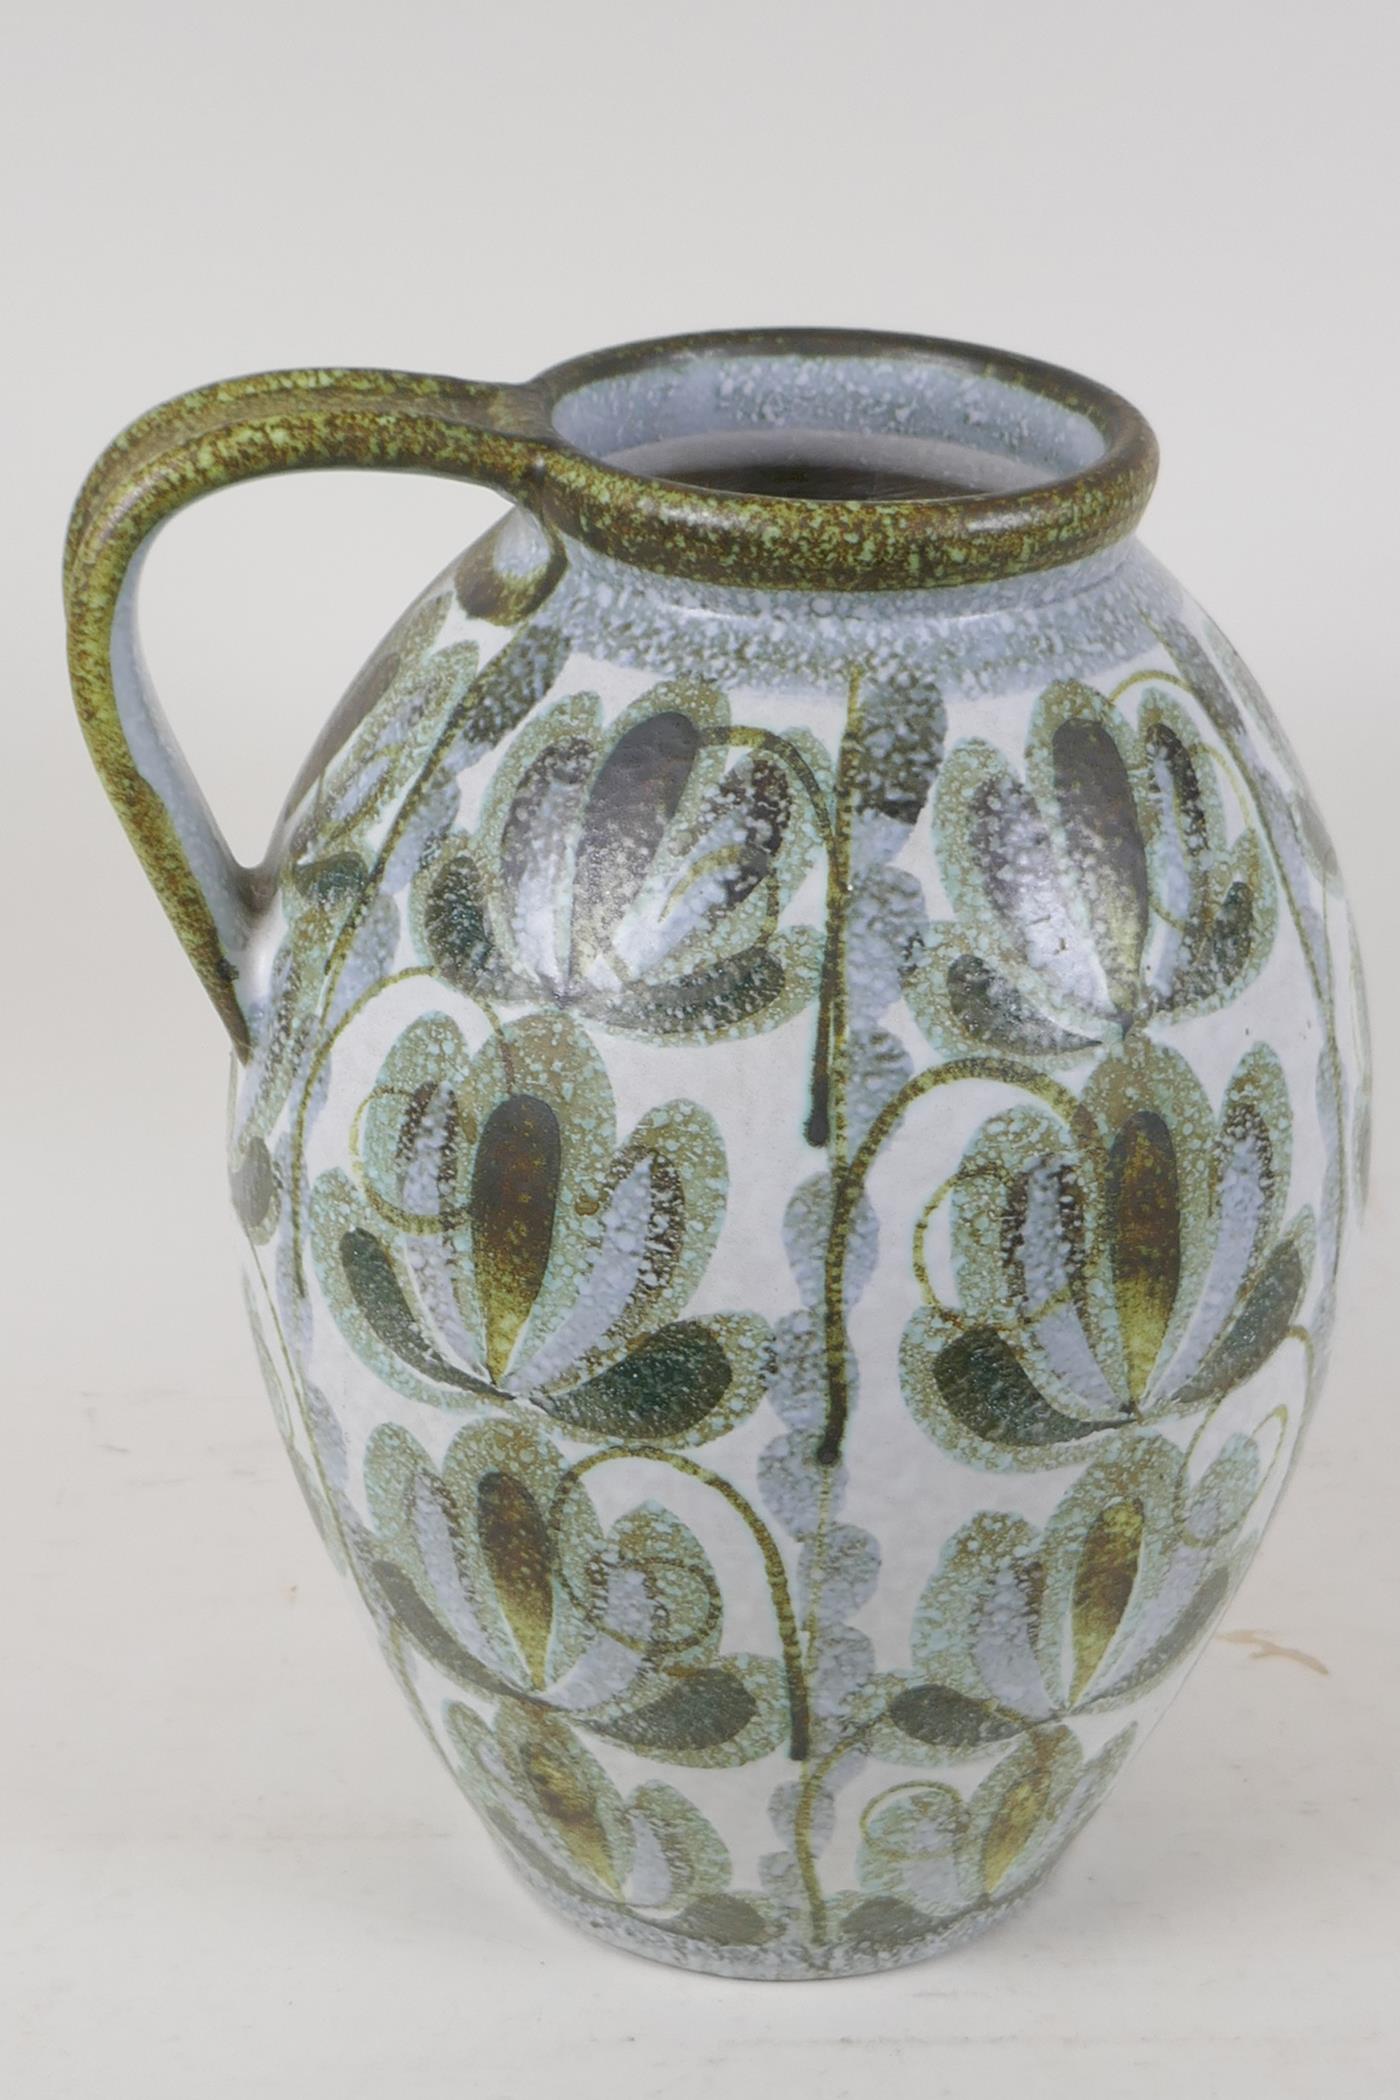 A large Denby Glyn Colledge studio pottery ewer, 12½" high